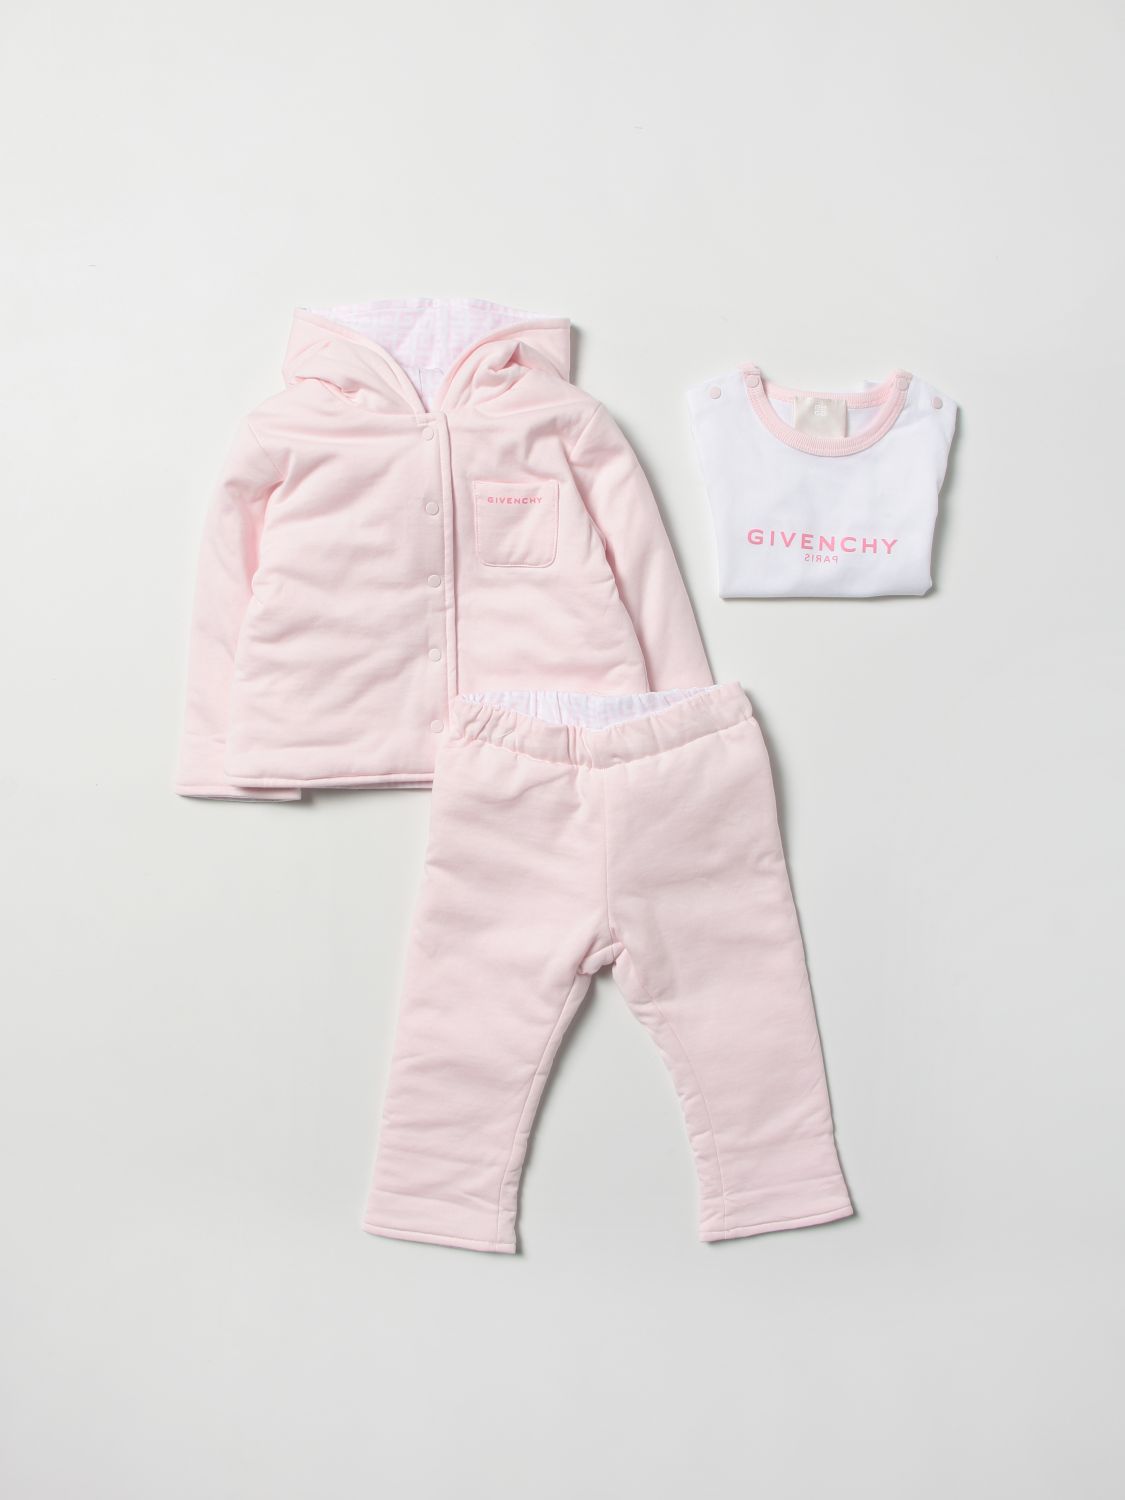 Jumpsuit Givenchy: Givenchy logo jacket + trousers + t-shirt set pink 3